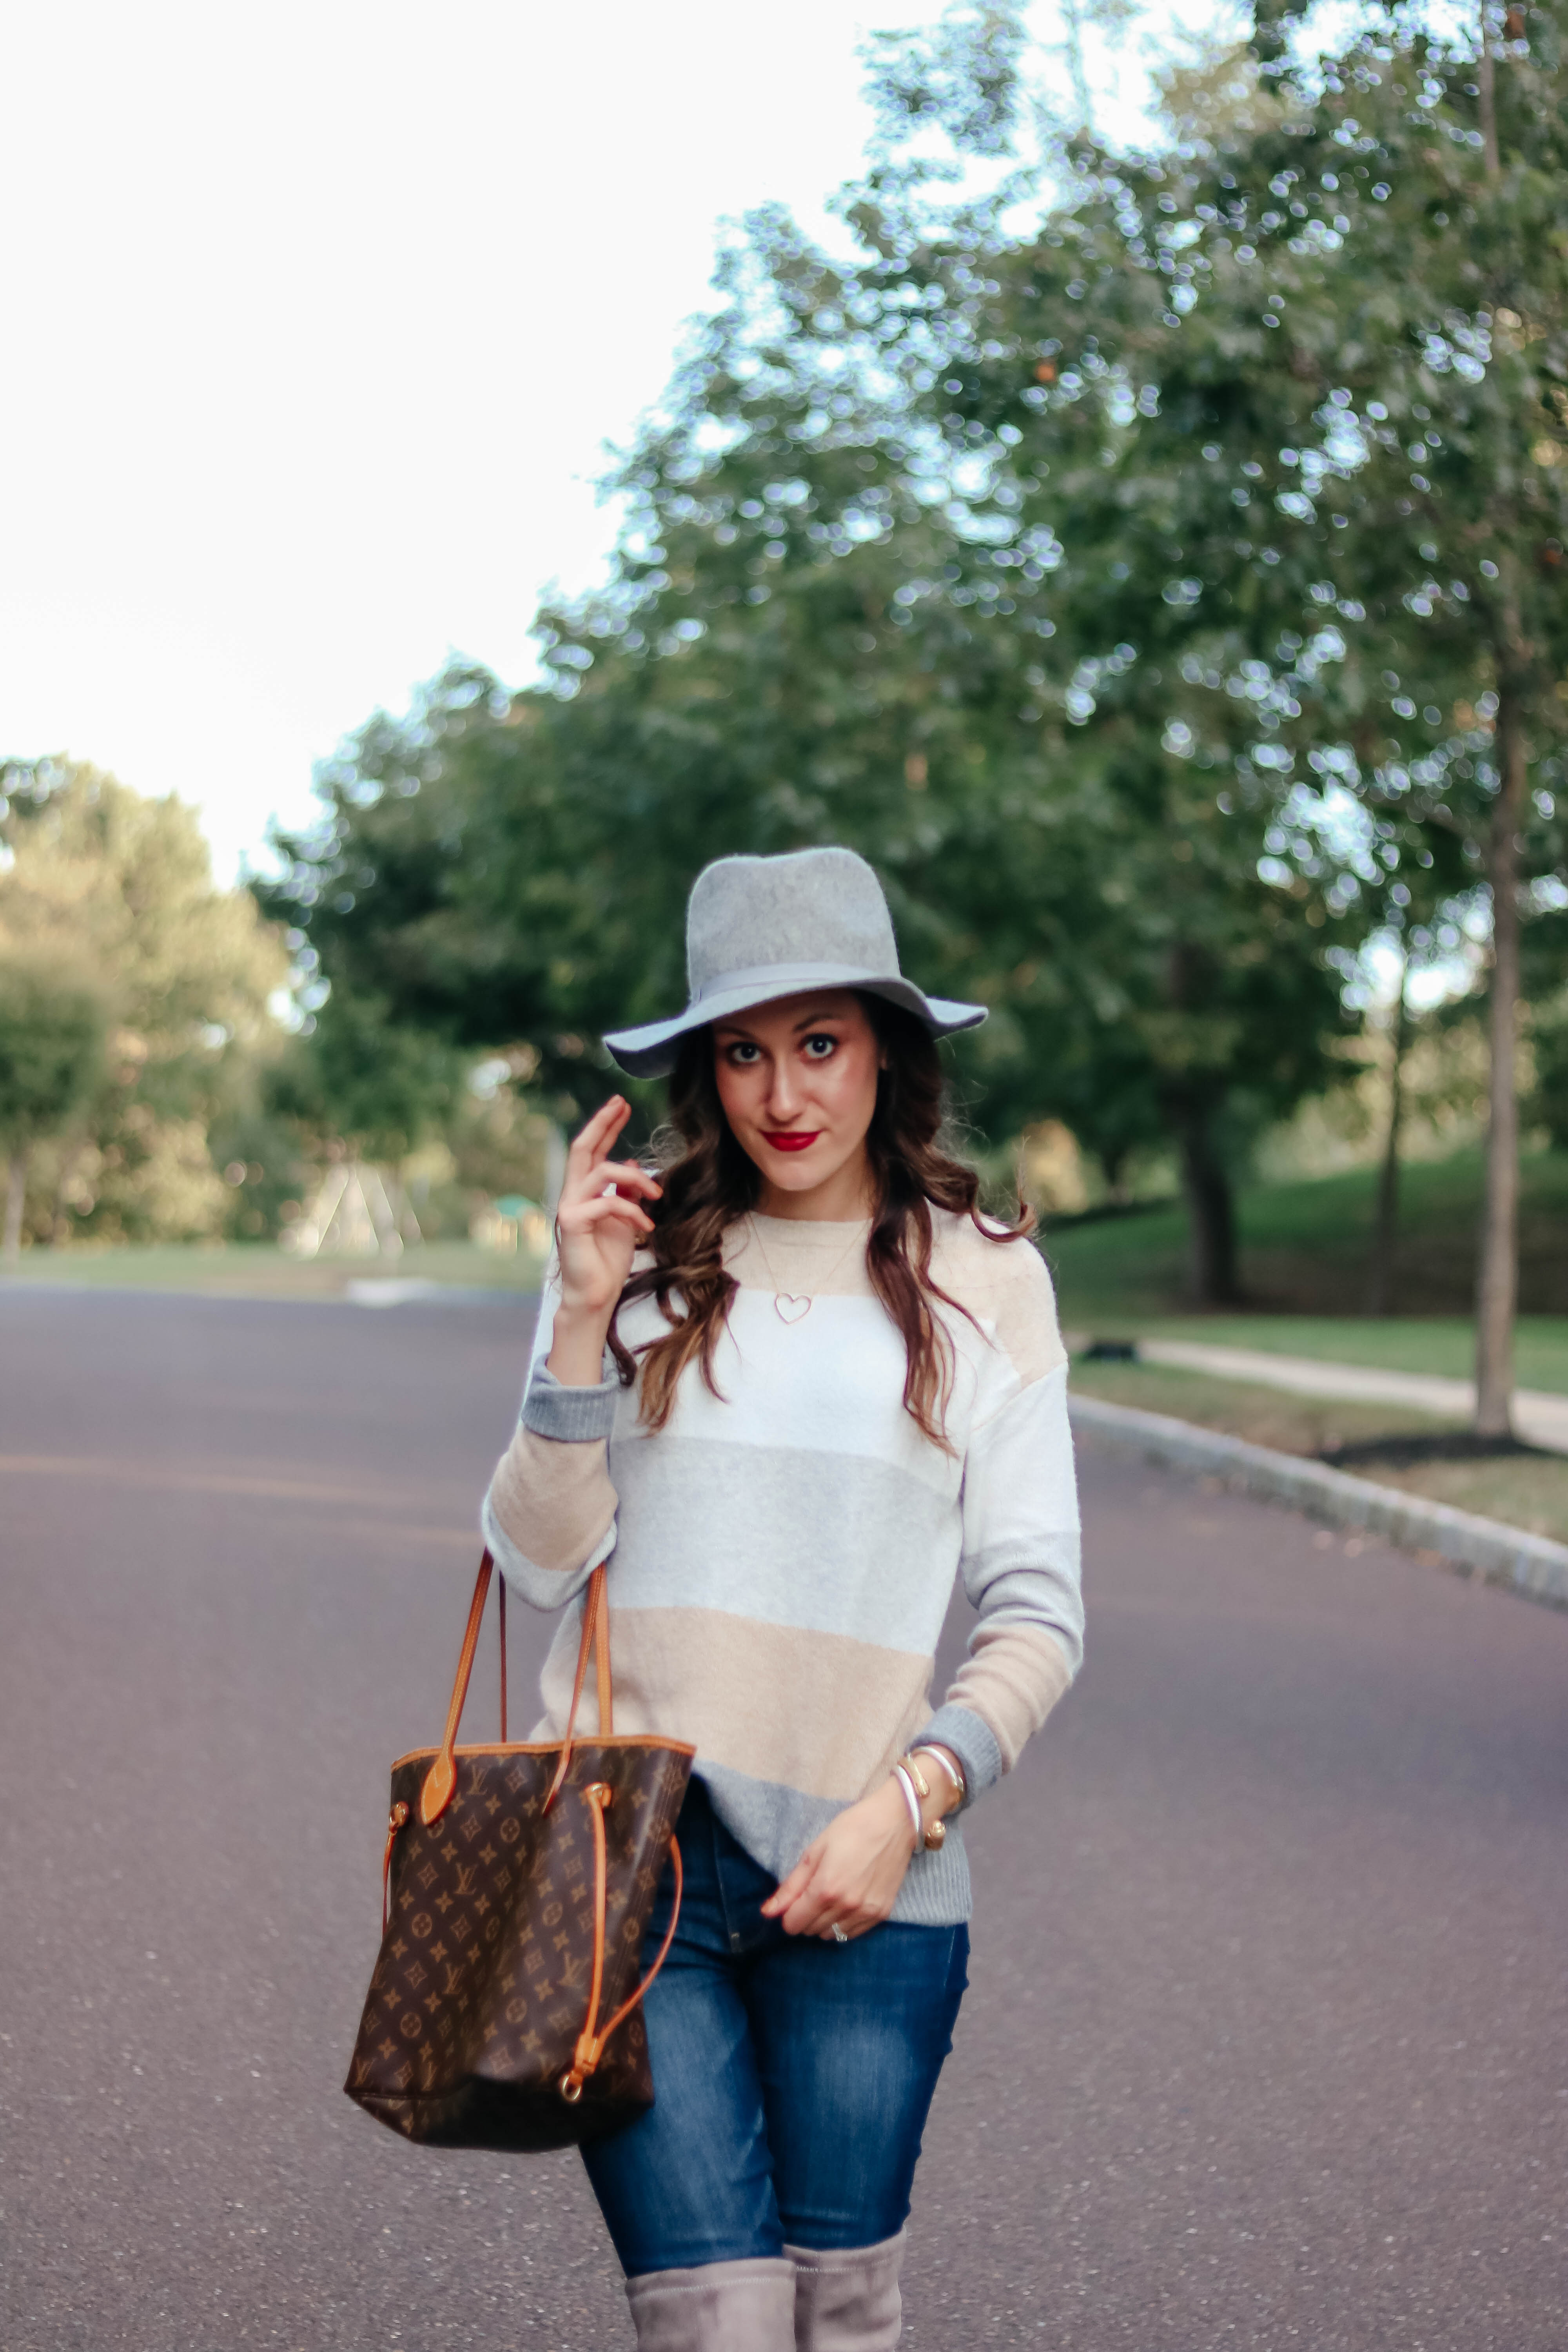 The $12 Sweater that feels like Cashmere - This $12 striped pullover sweater is INCREDIBLE and WILL sell out, so treat yo'self ASAP! - Easy, affordable fall fashion on Coming Up Roses